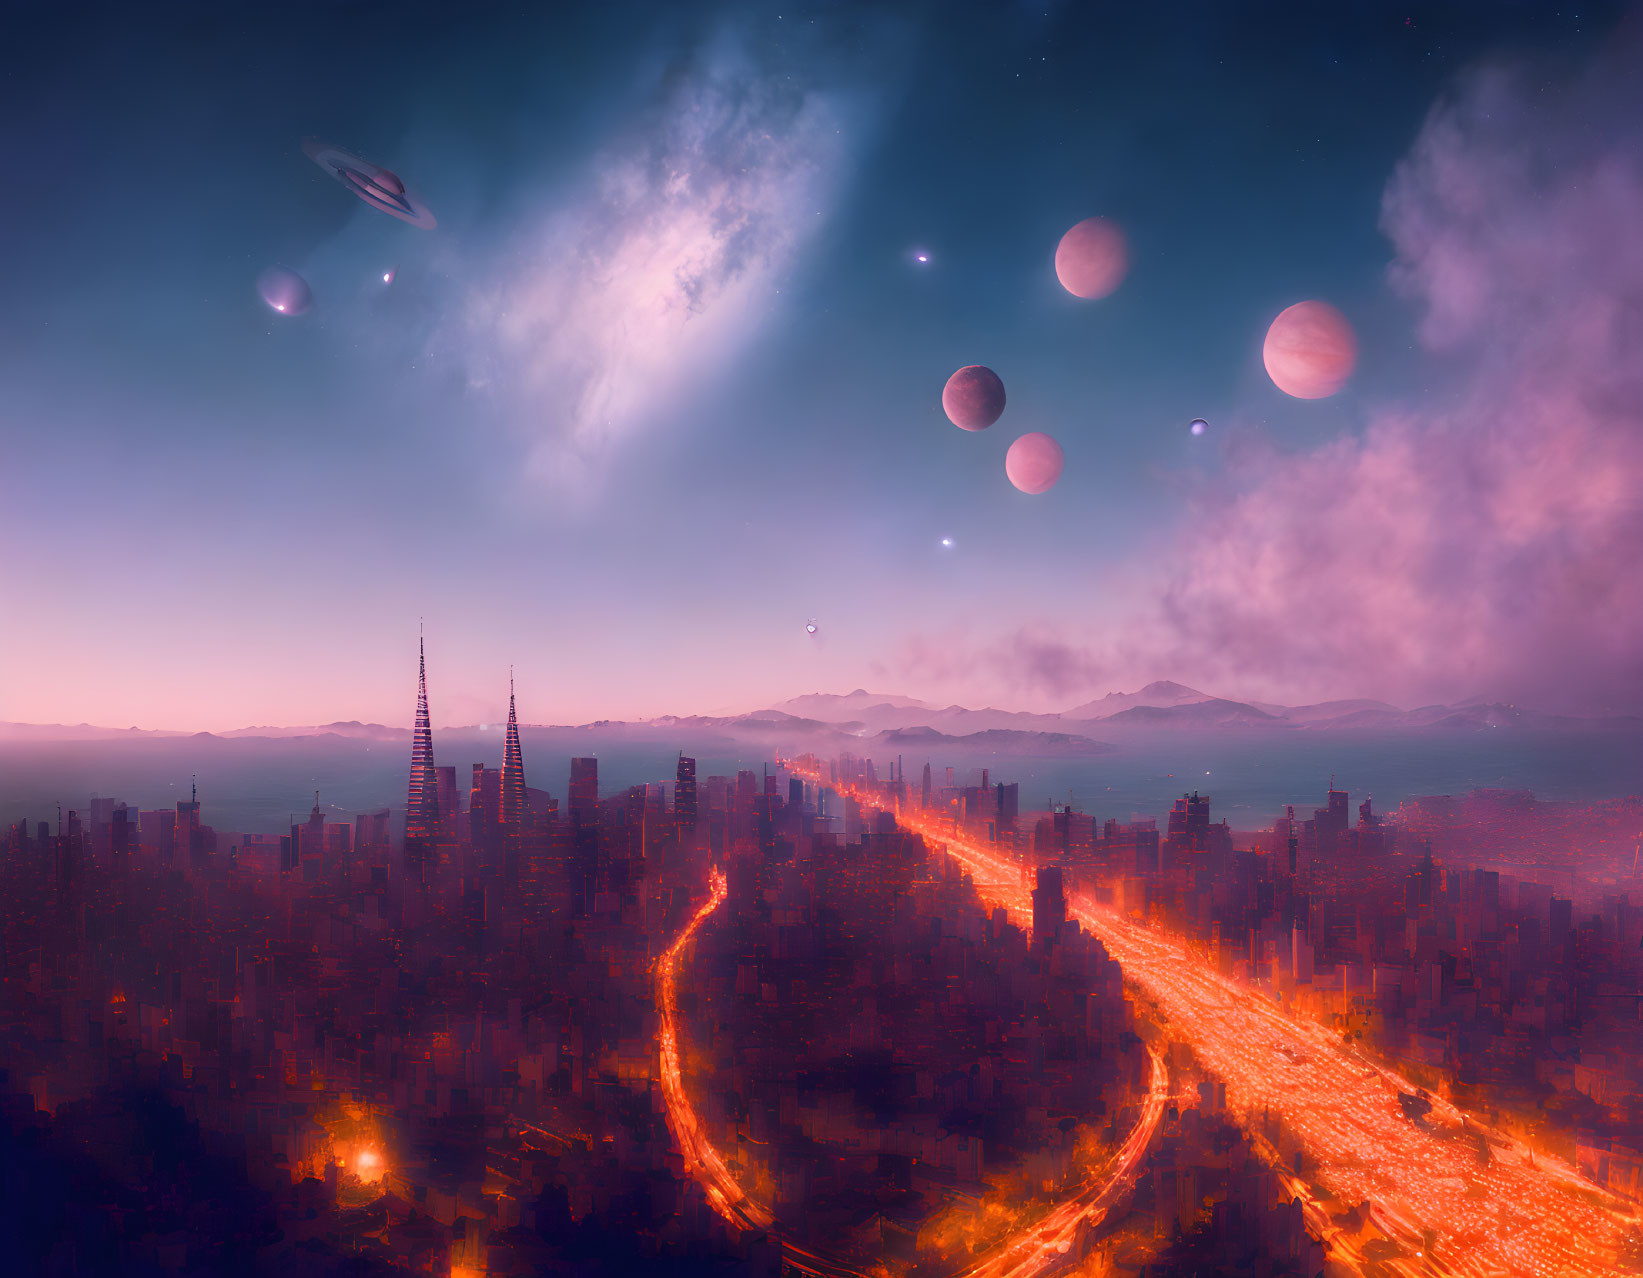 Futuristic cityscape at twilight with multiple moons and galaxy